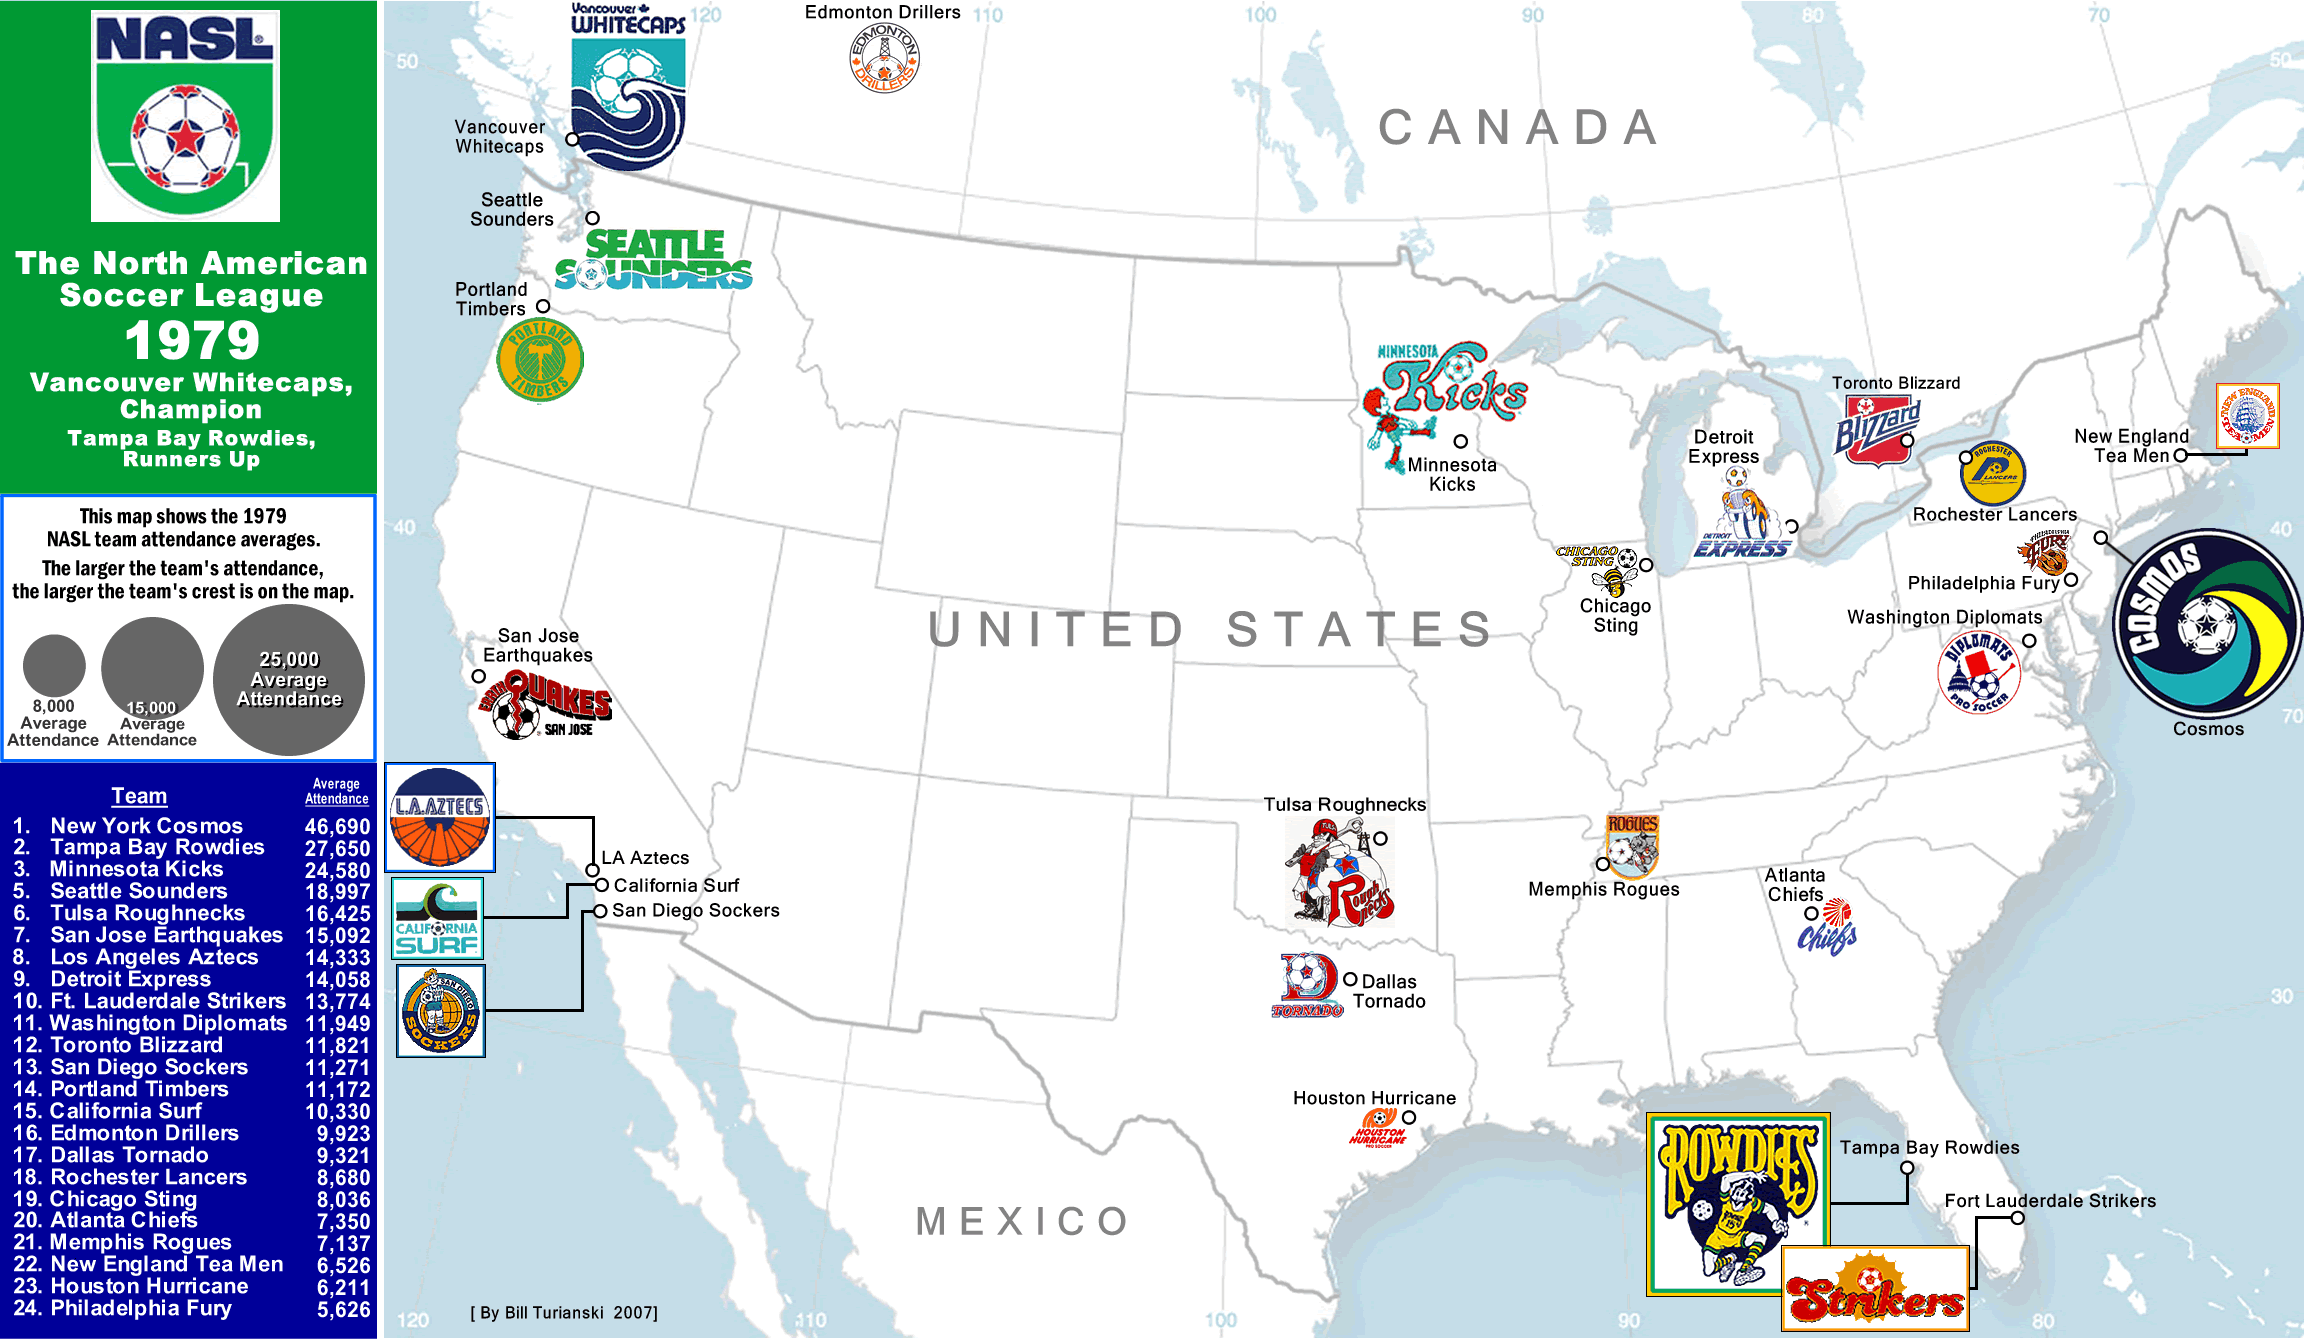 The NASL at its height.  Image courtesy of billsportsmaps.com